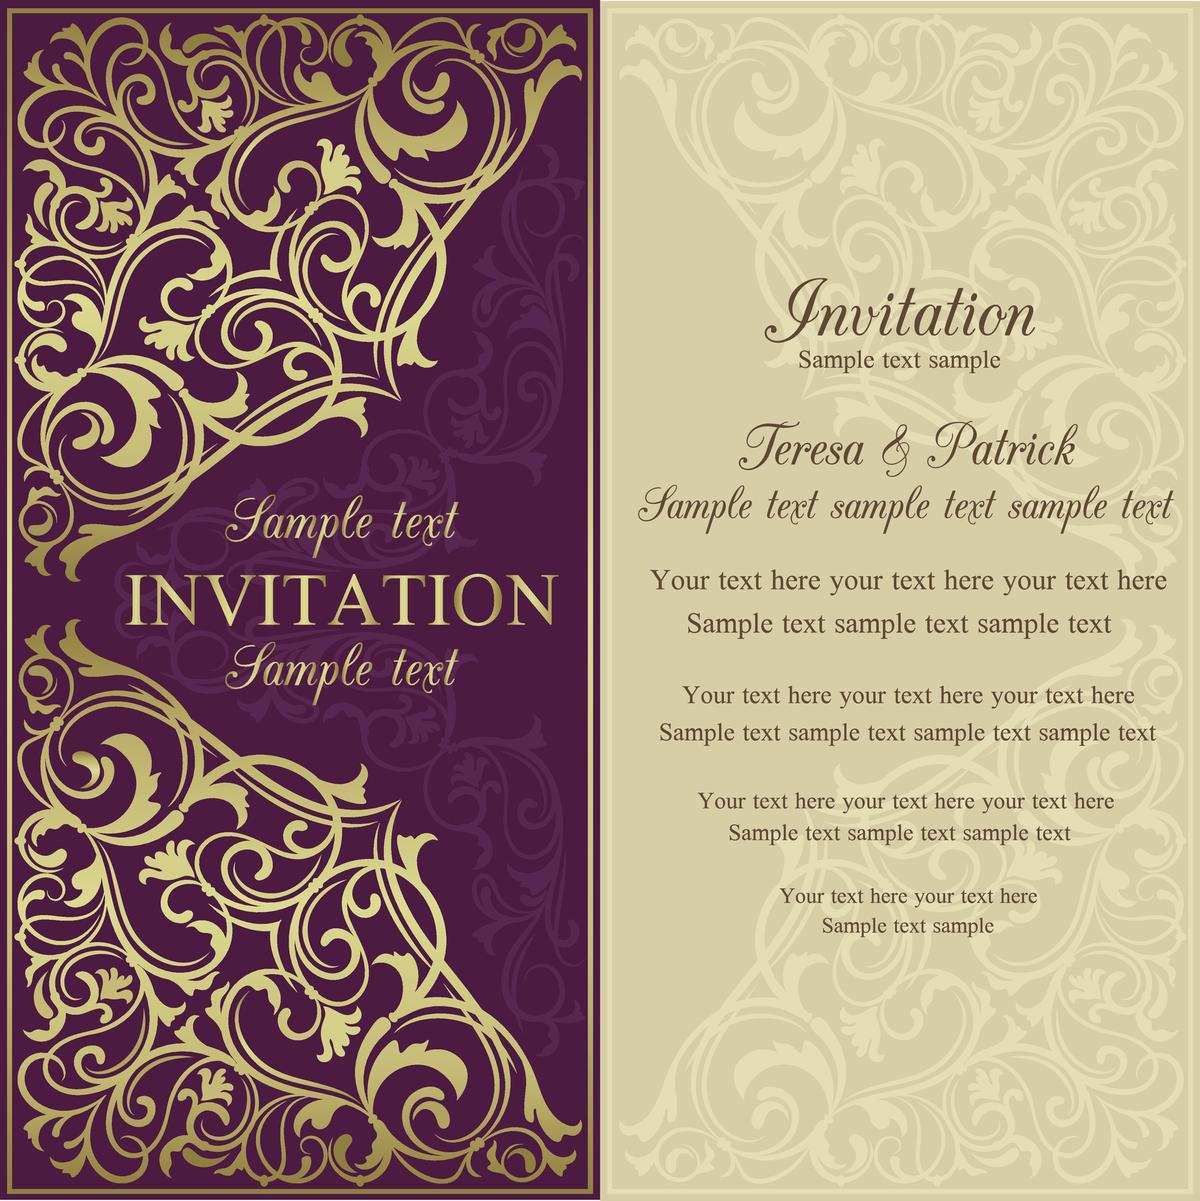 22 Visiting The Example Of Invitation Card Templates by The For Sample Wedding Invitation Cards Templates